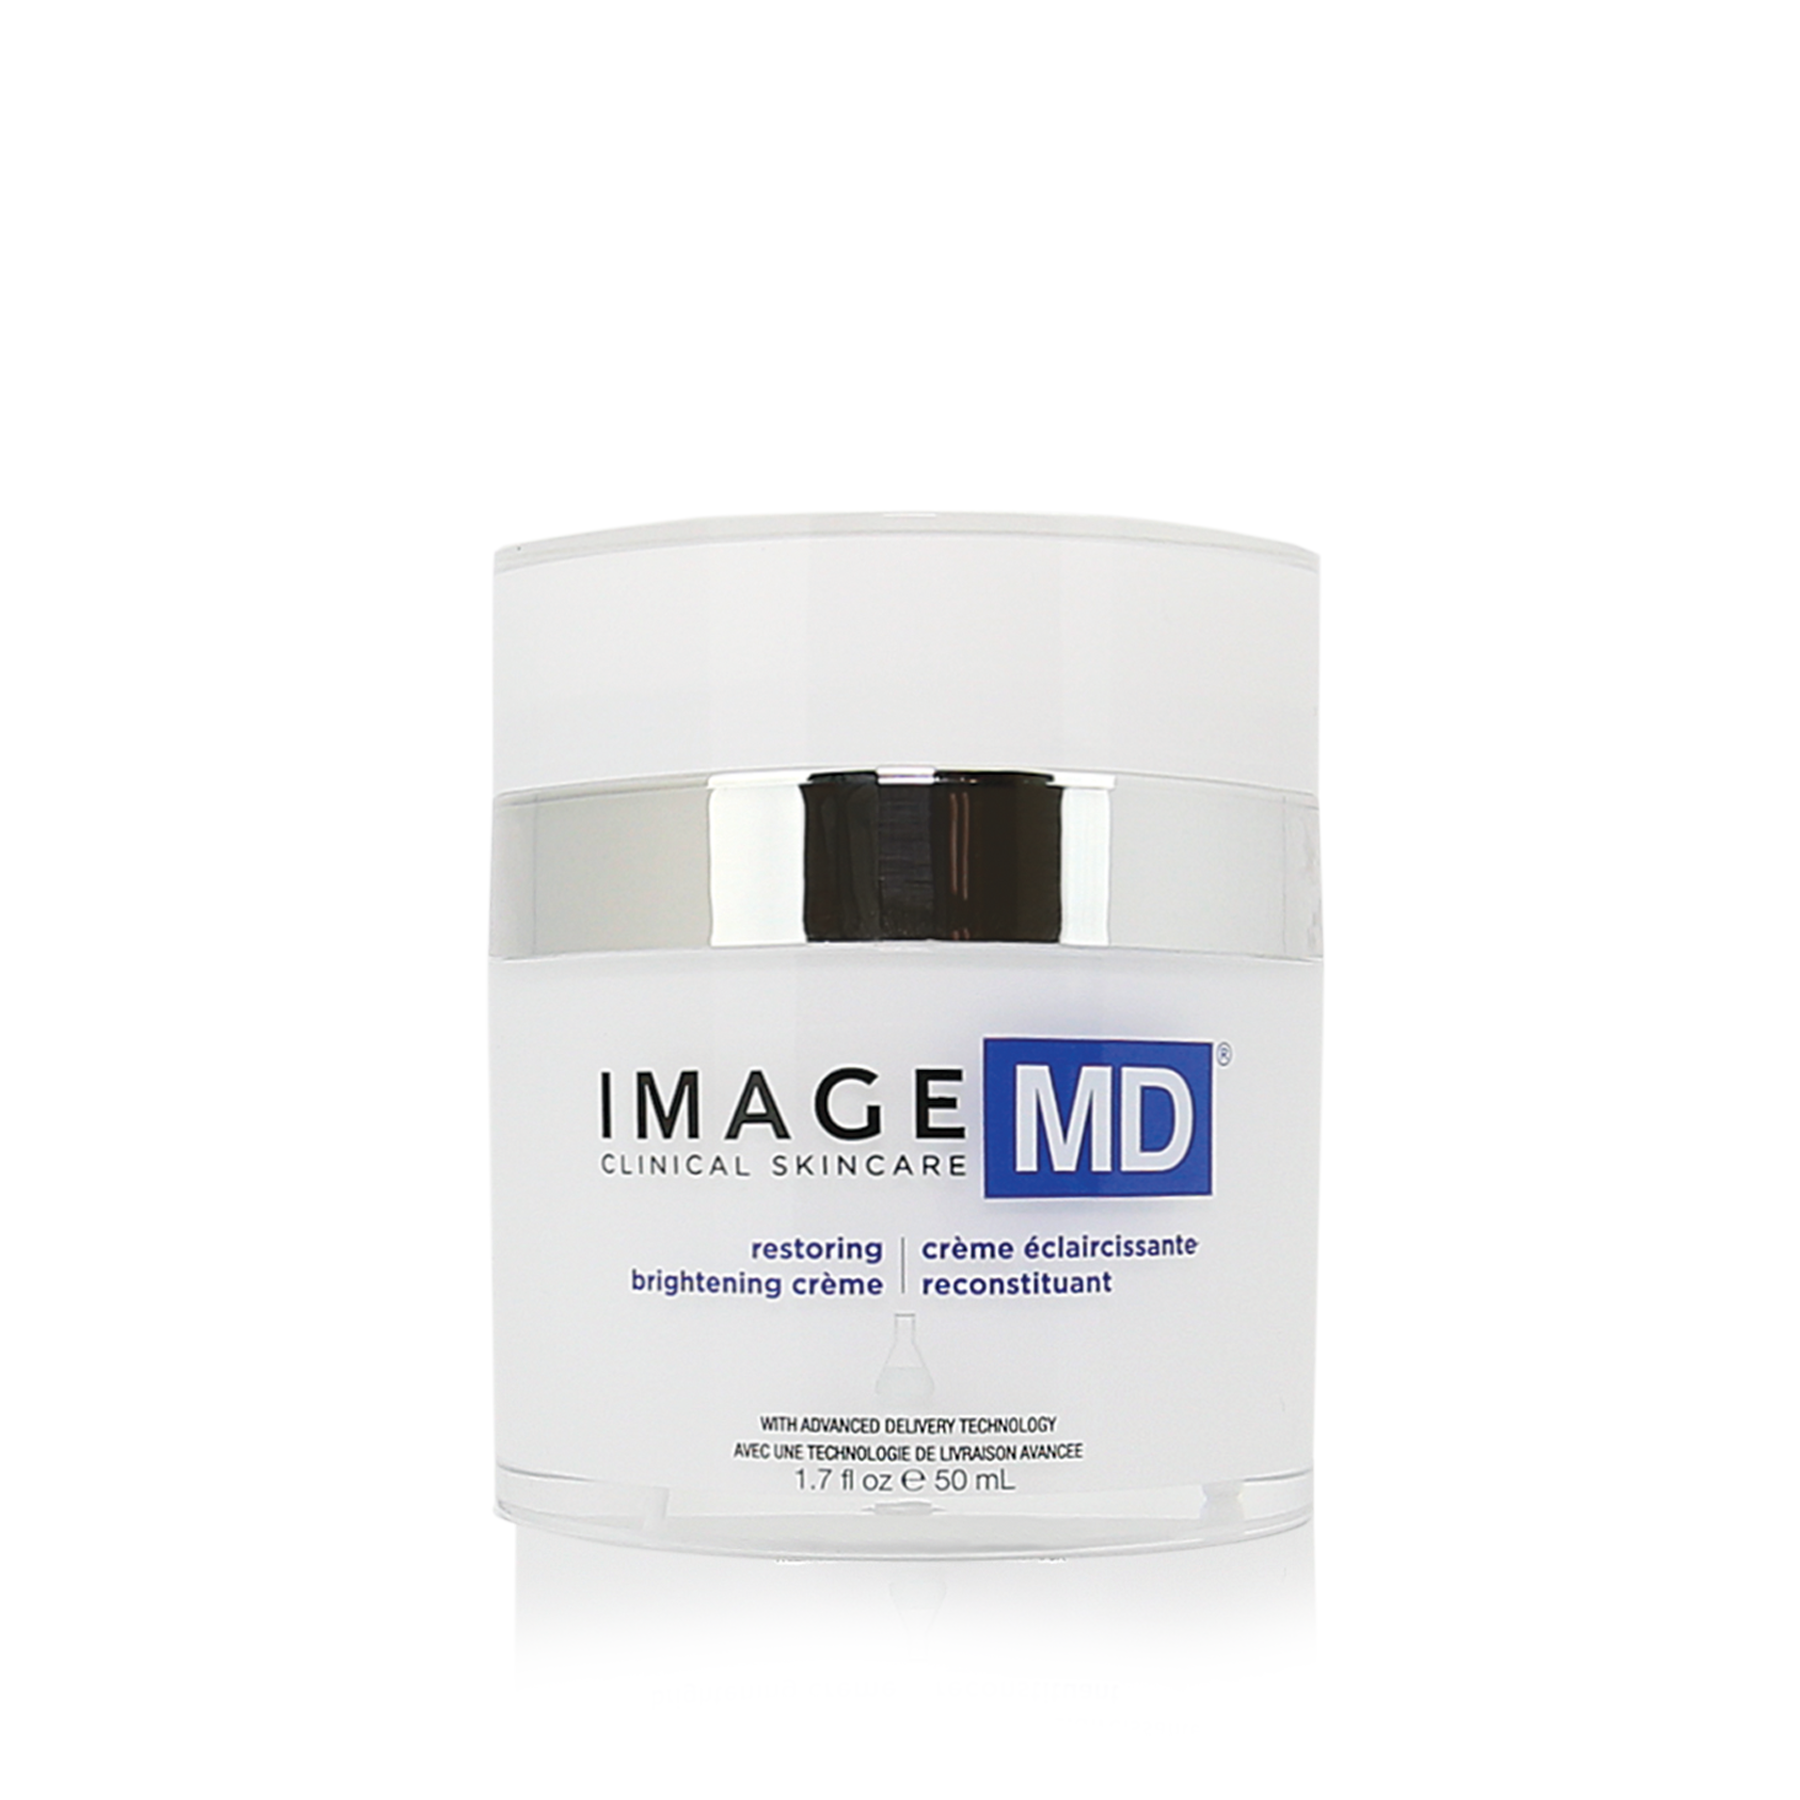 Restoring brightening crème MD with ADT Technology